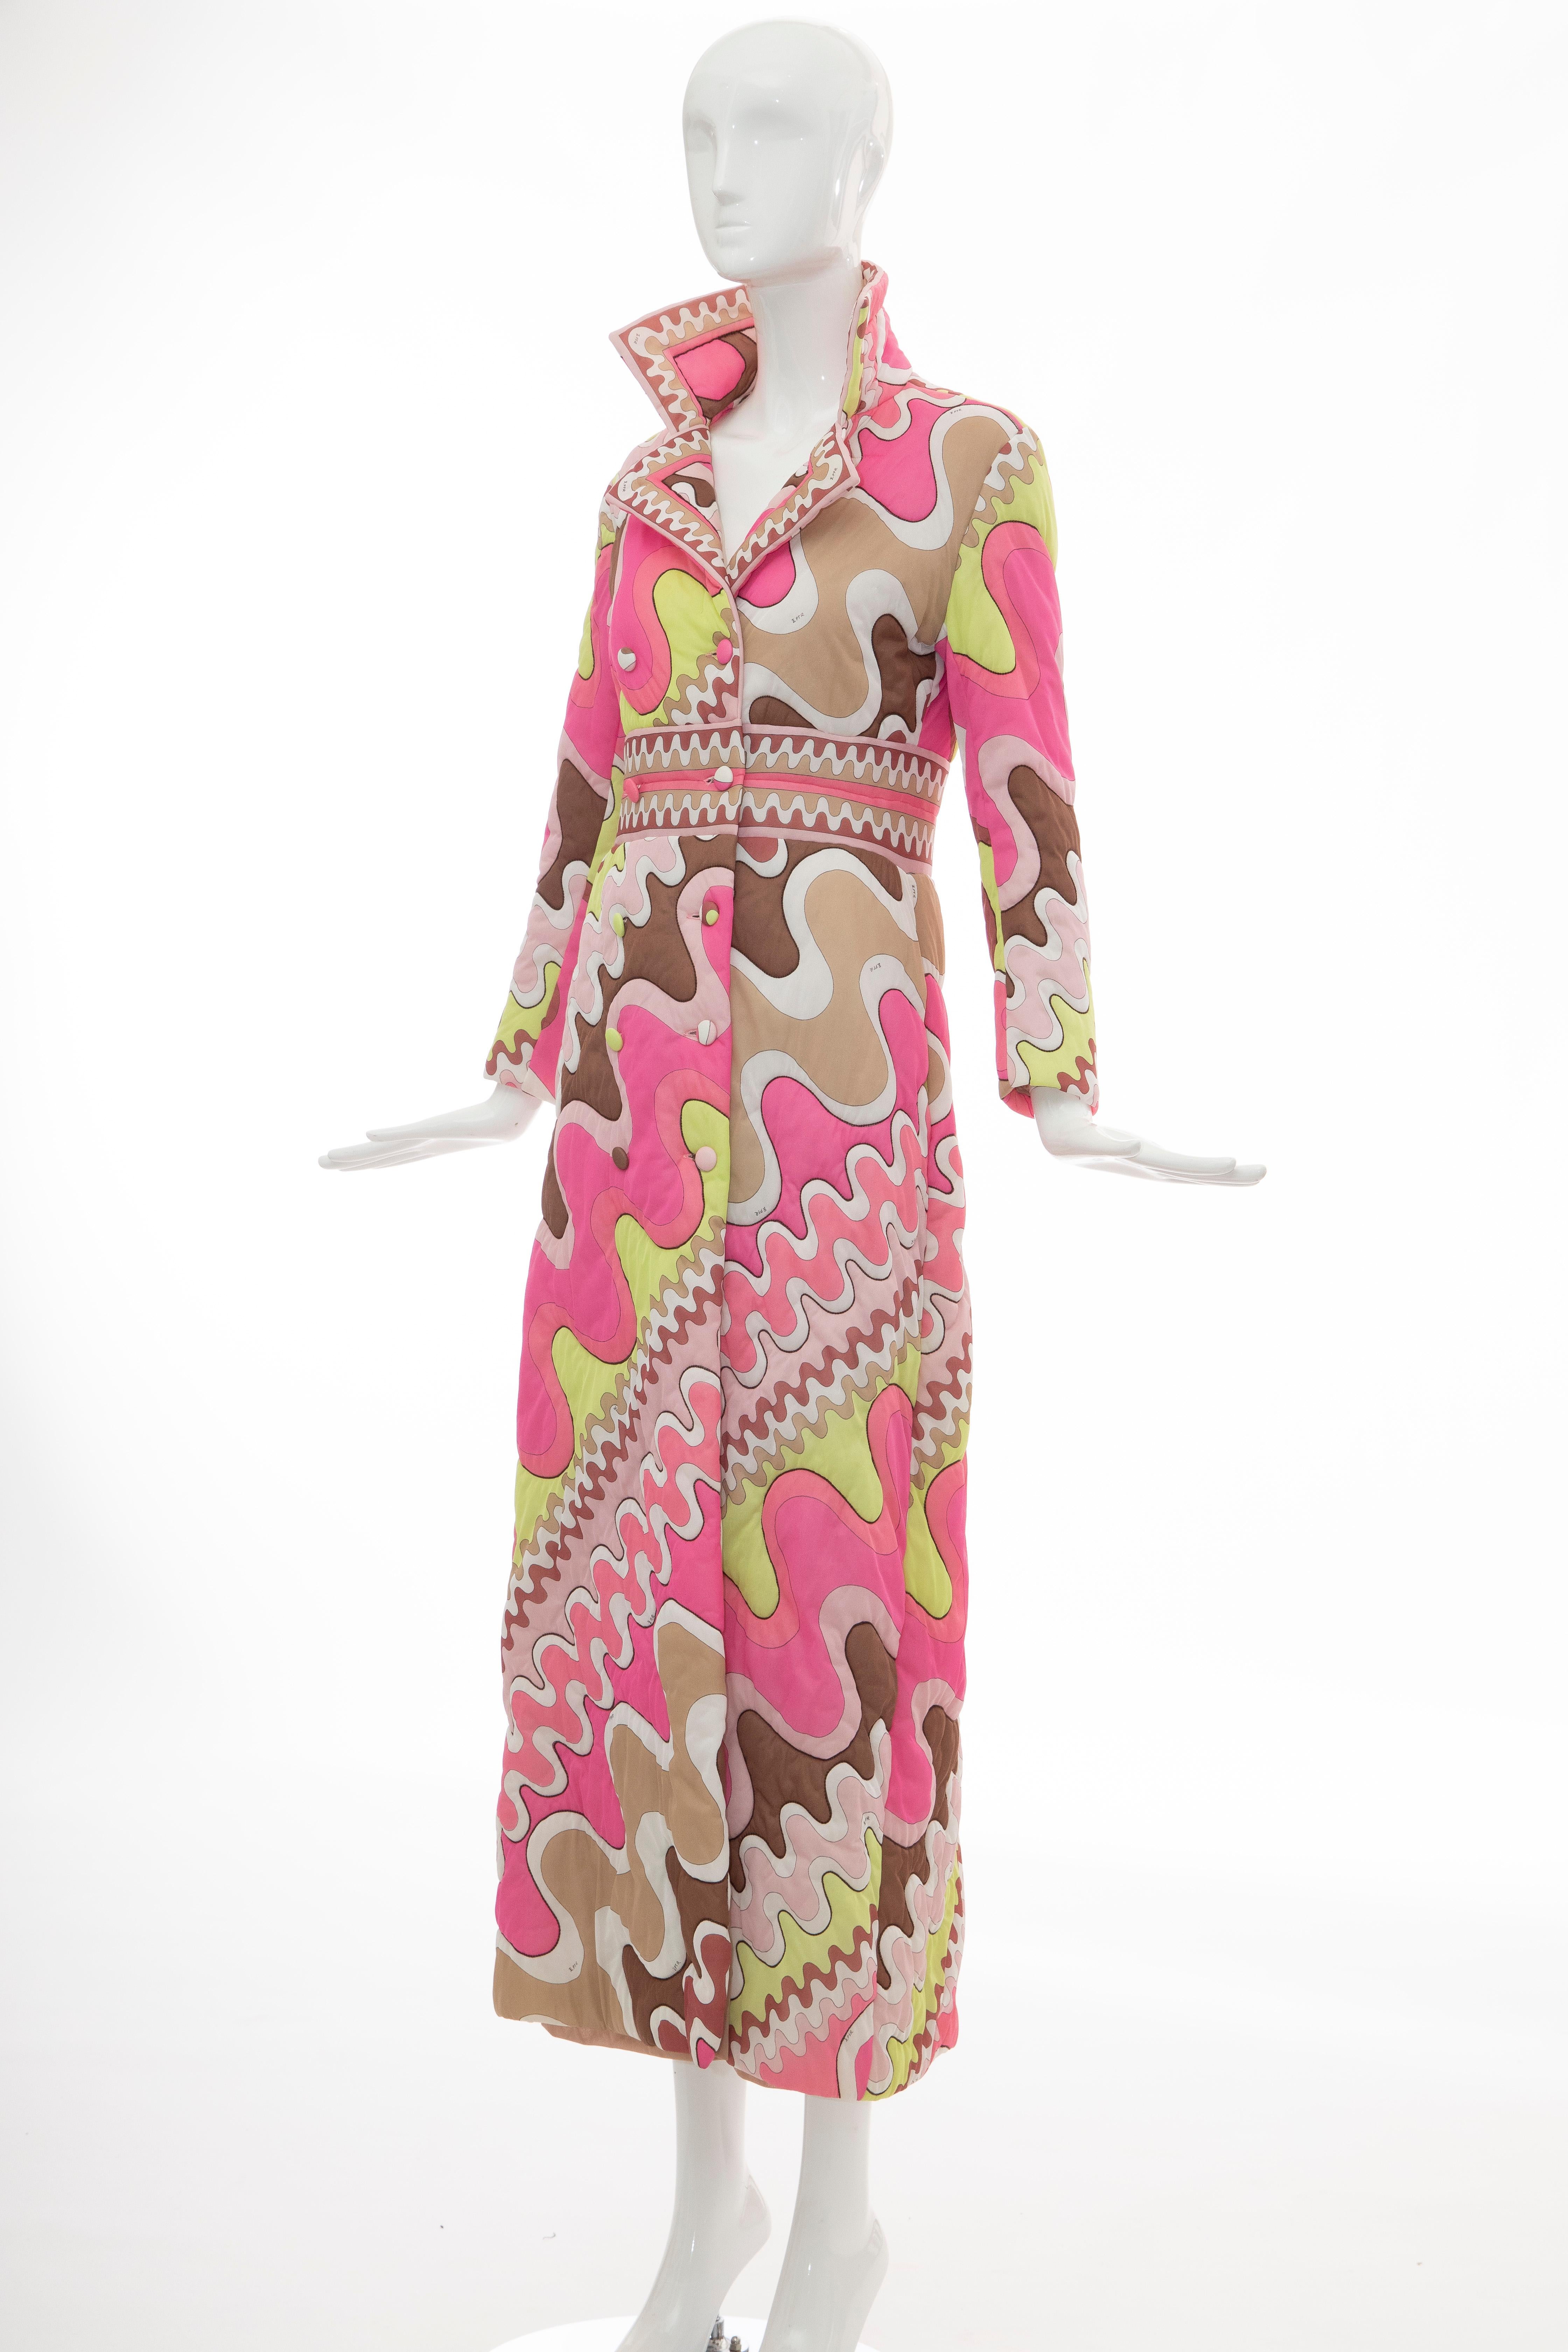 Emilio Pucci Double-Breasted Abstract Print Quilted Coat, Circa: 1970's 5